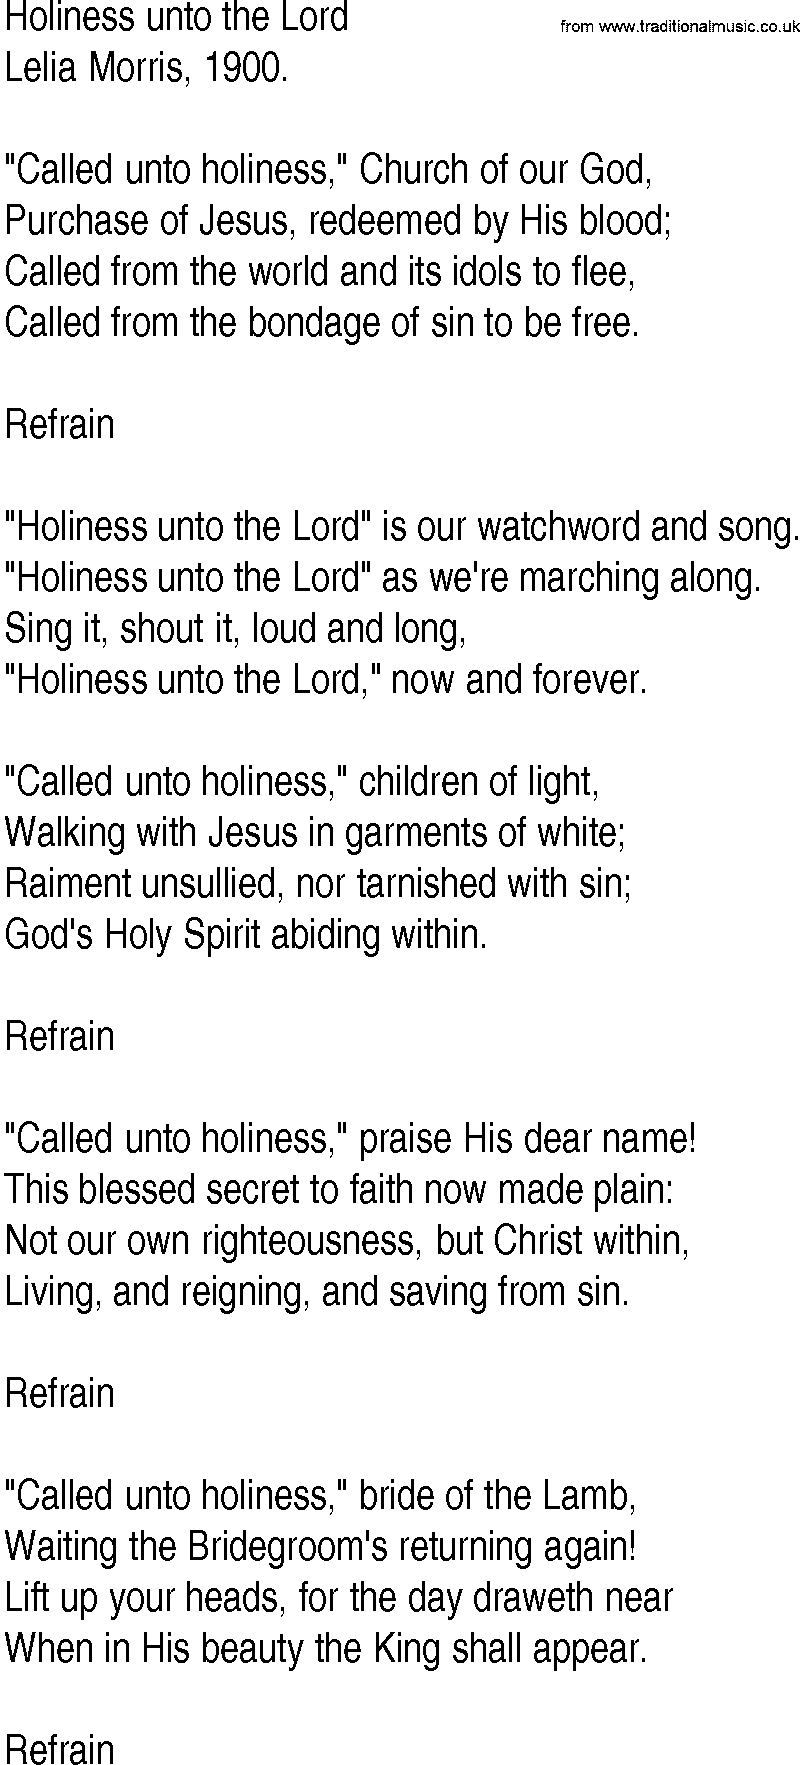 Hymn and Gospel Song: Holiness unto the Lord by Lelia Morris lyrics